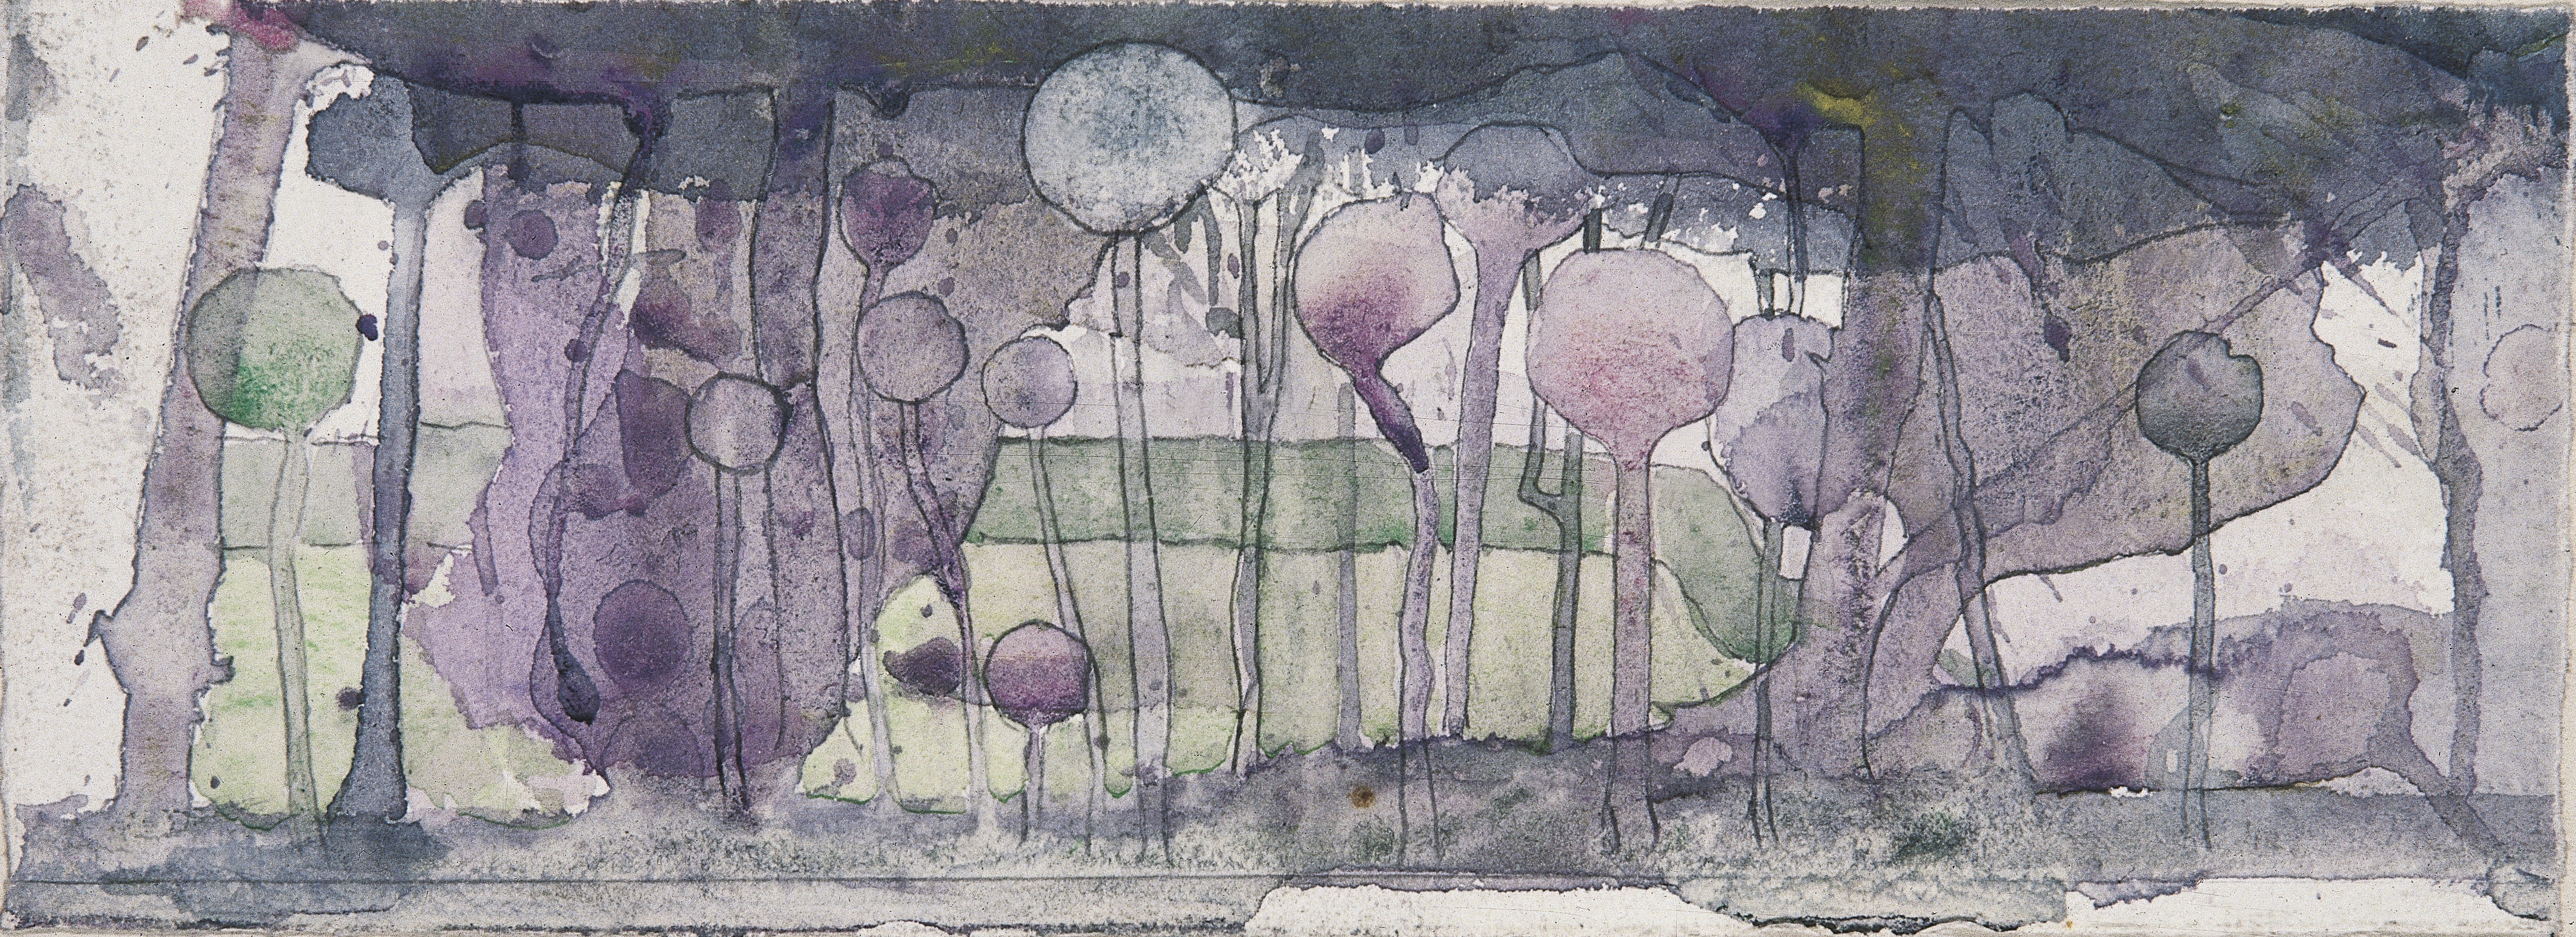 Cabbages in an Orchard, by Charles Rennie Mackintosh, from The Magazine, April, 1894 